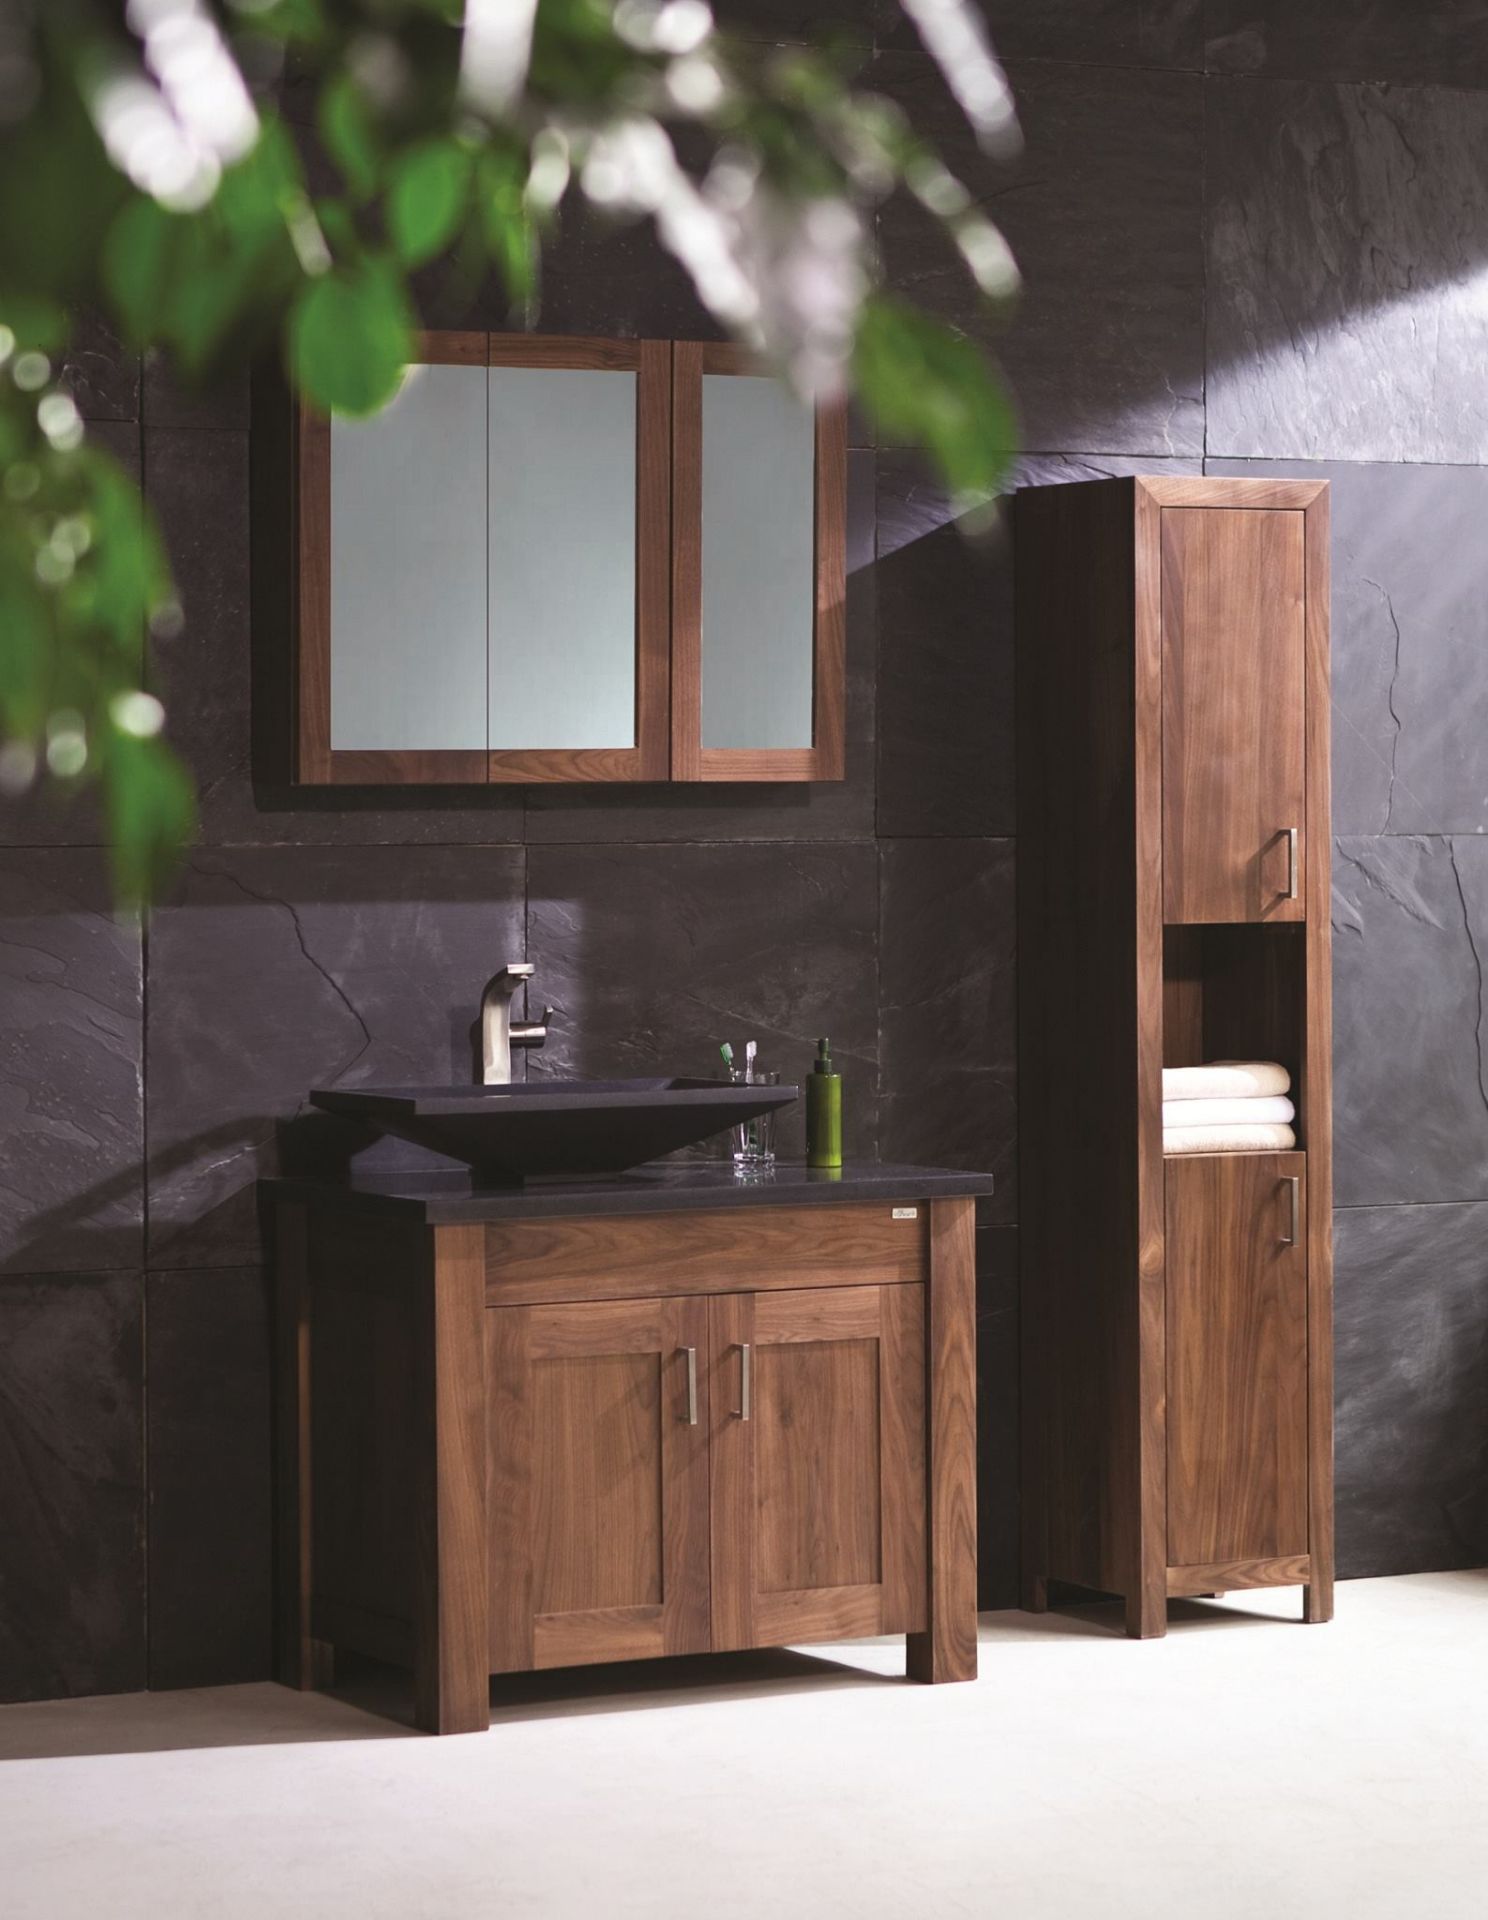 1 x Stonearth 'Finesse' Countertop Washstand - American Solid Walnut - Original RRP £1,400 - Image 5 of 12